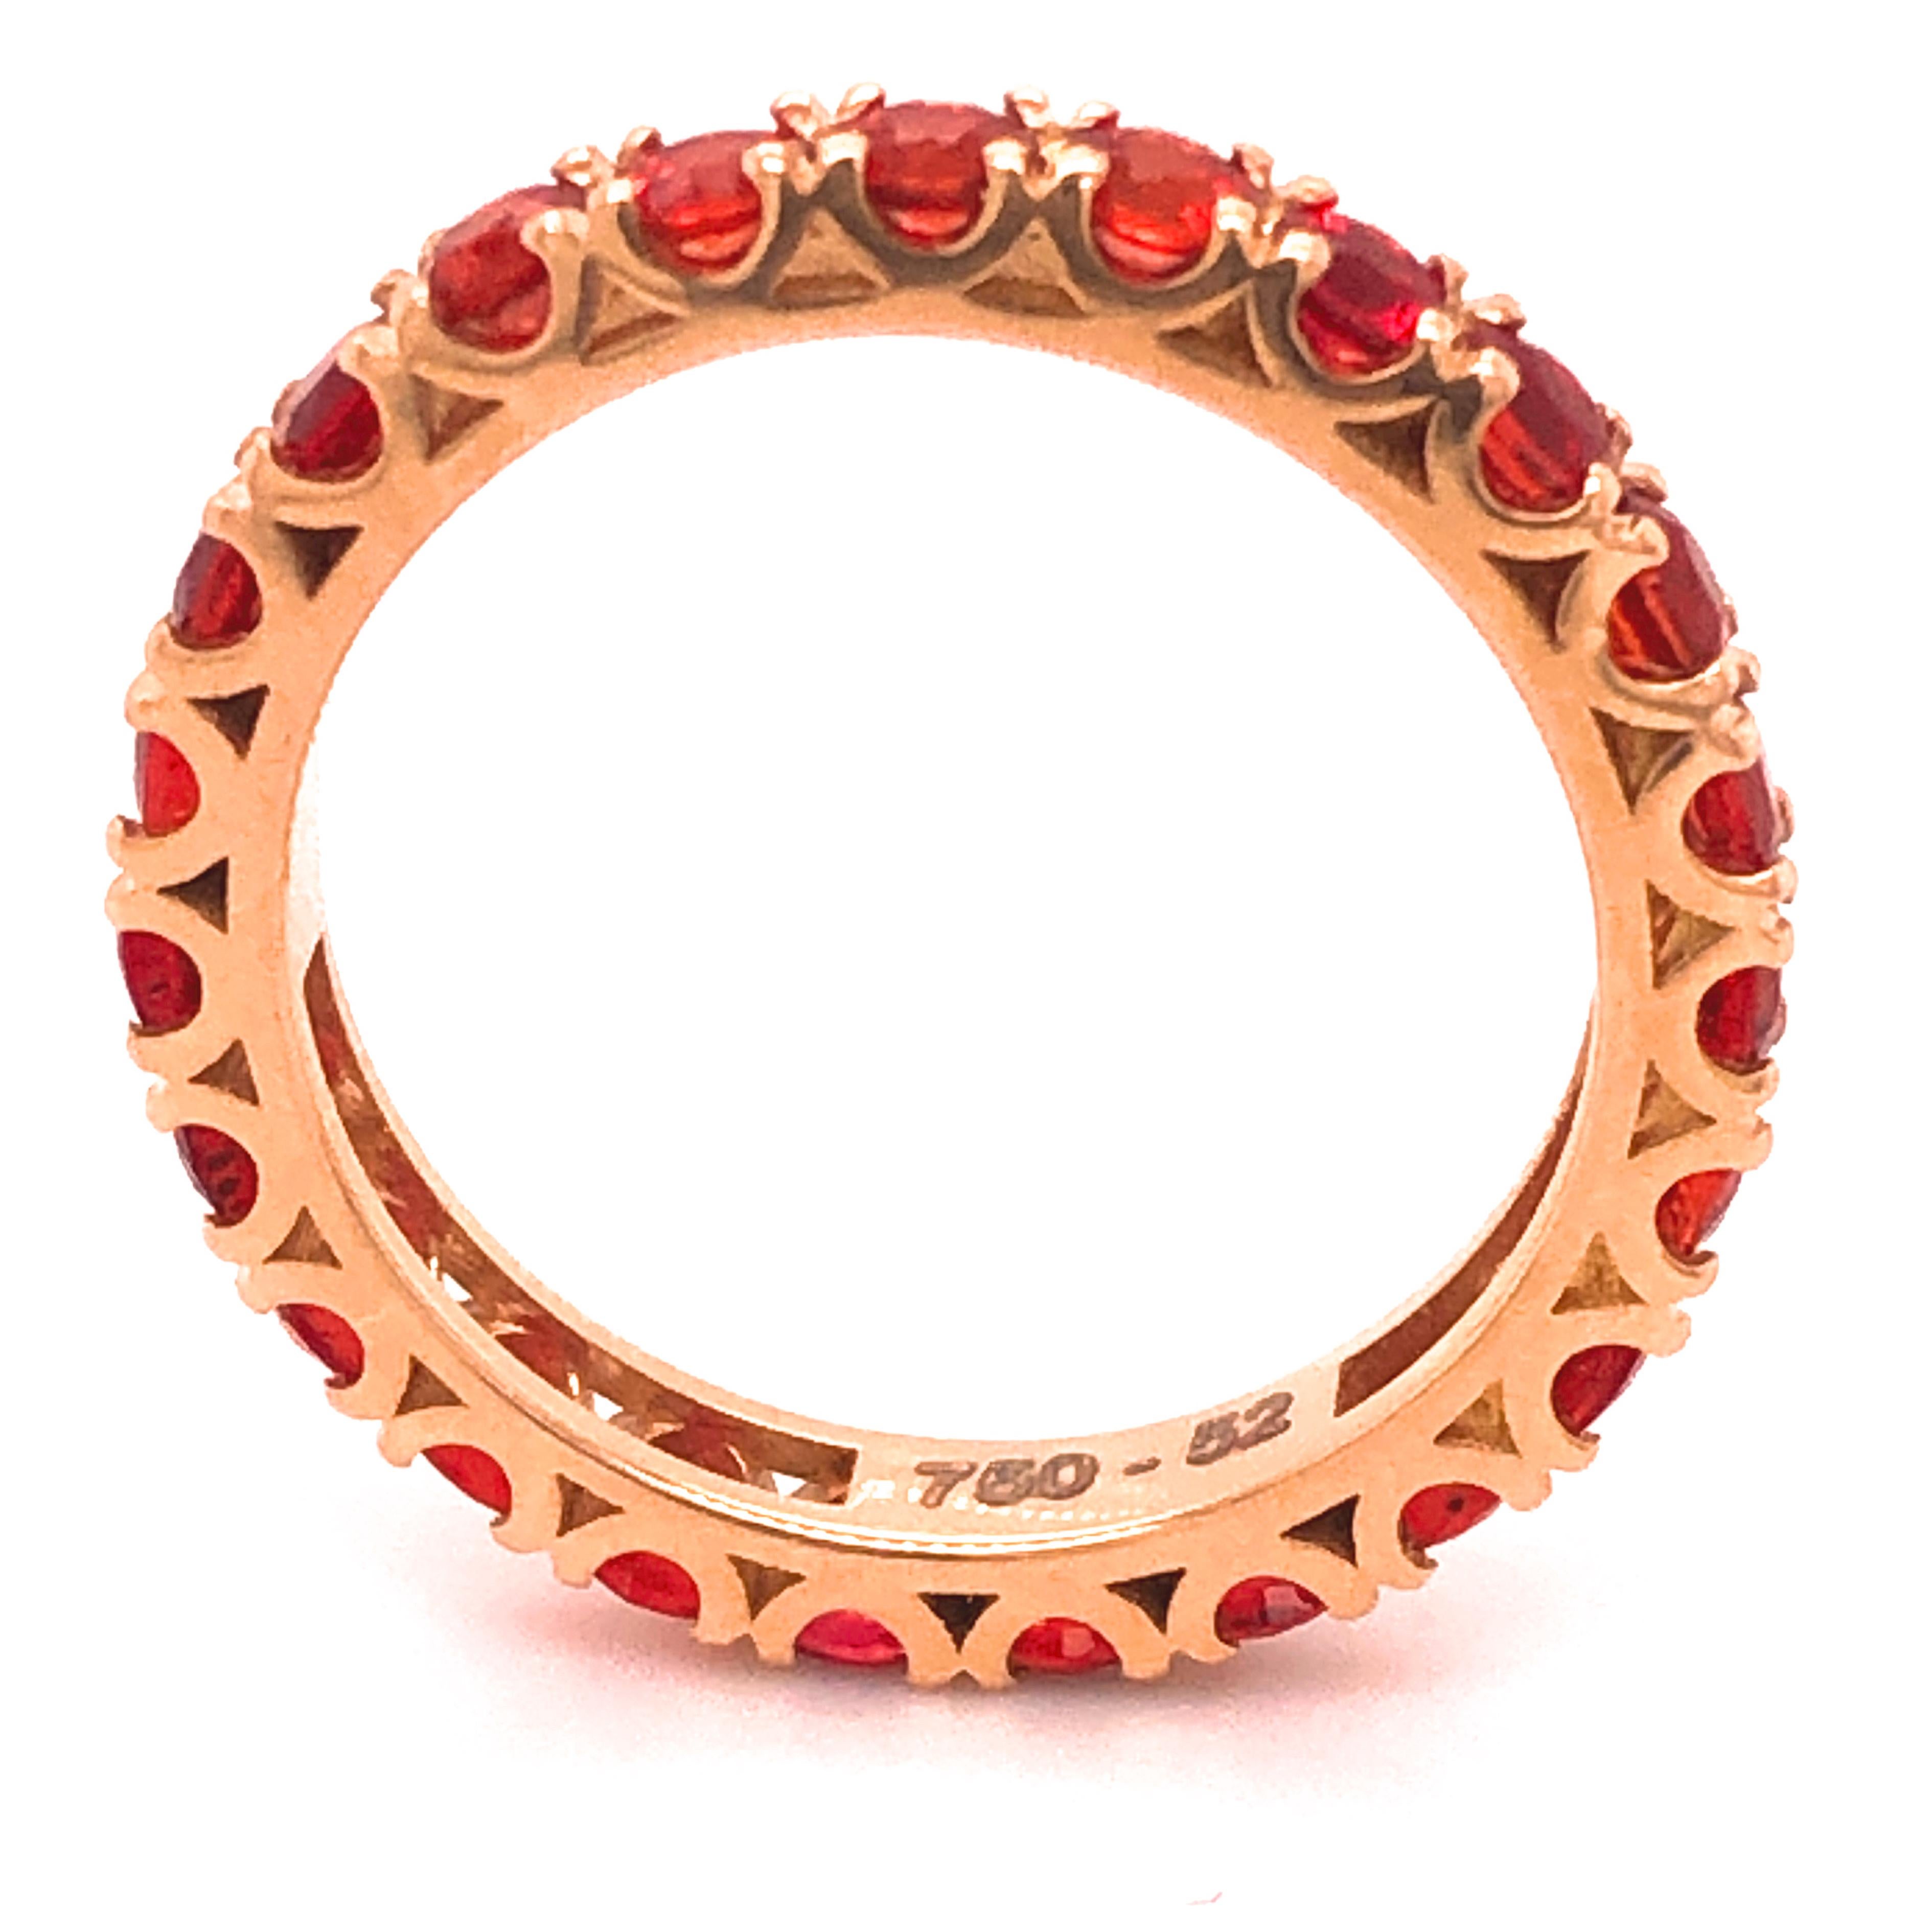 Beautifully hand crafted Eternity Band featuring 23 round brilliant cut Natural Red Mozanbique Ruby for a total weight of 2.11 Carat in an 18Kt Rose Gold fish tail setting.
US Size 6
French Size 52
In our fitted burgundy leather or black case and